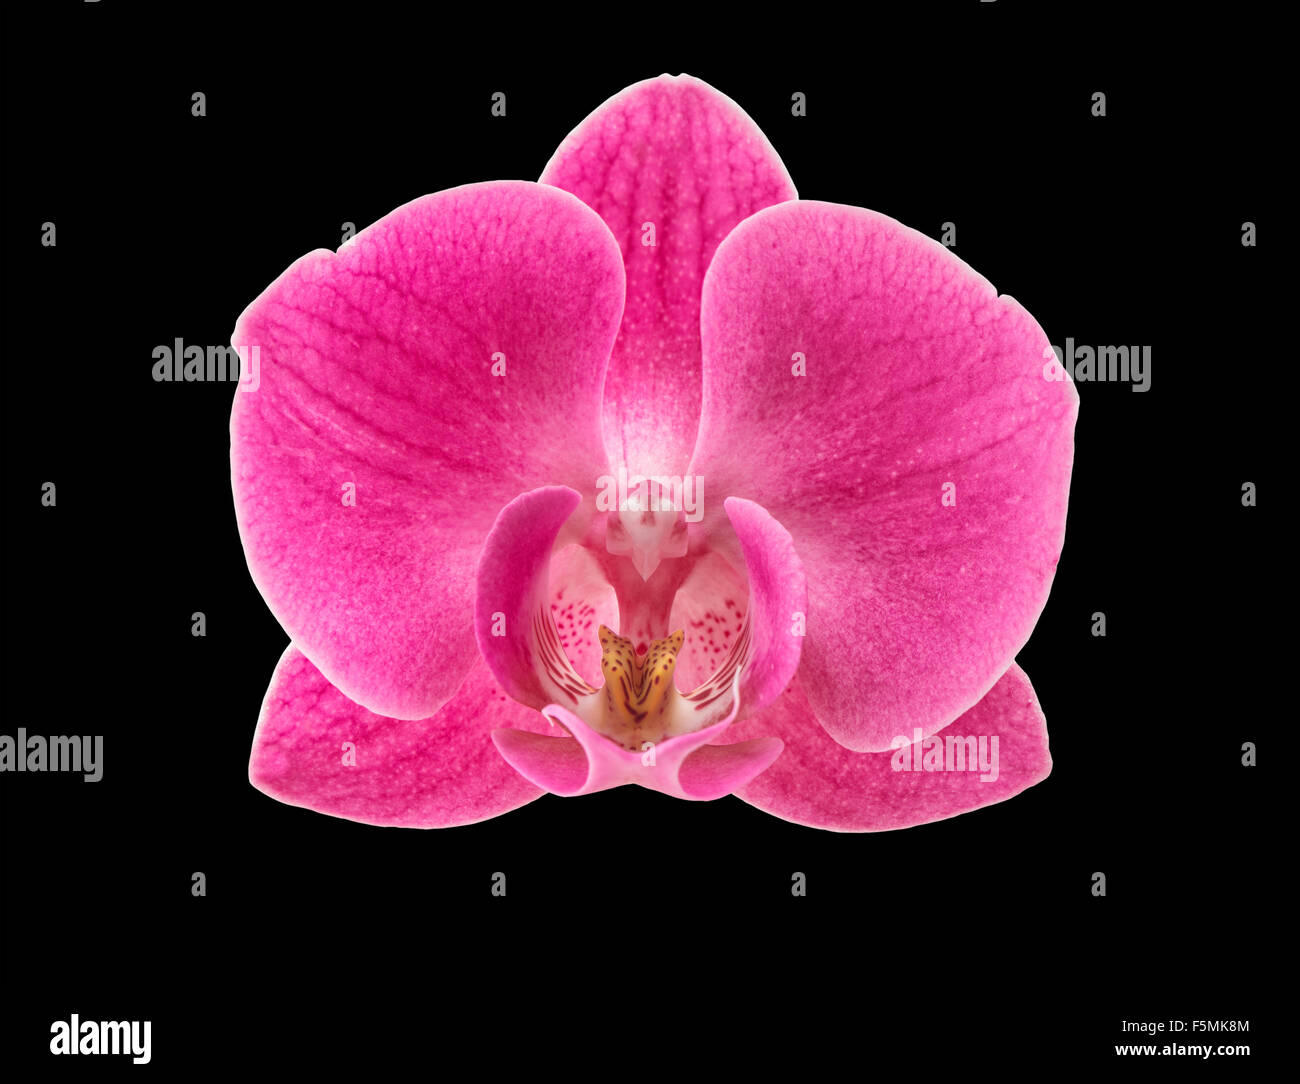 Orchid flower head isolated on black background. Fresh pink blossom Stock Photo